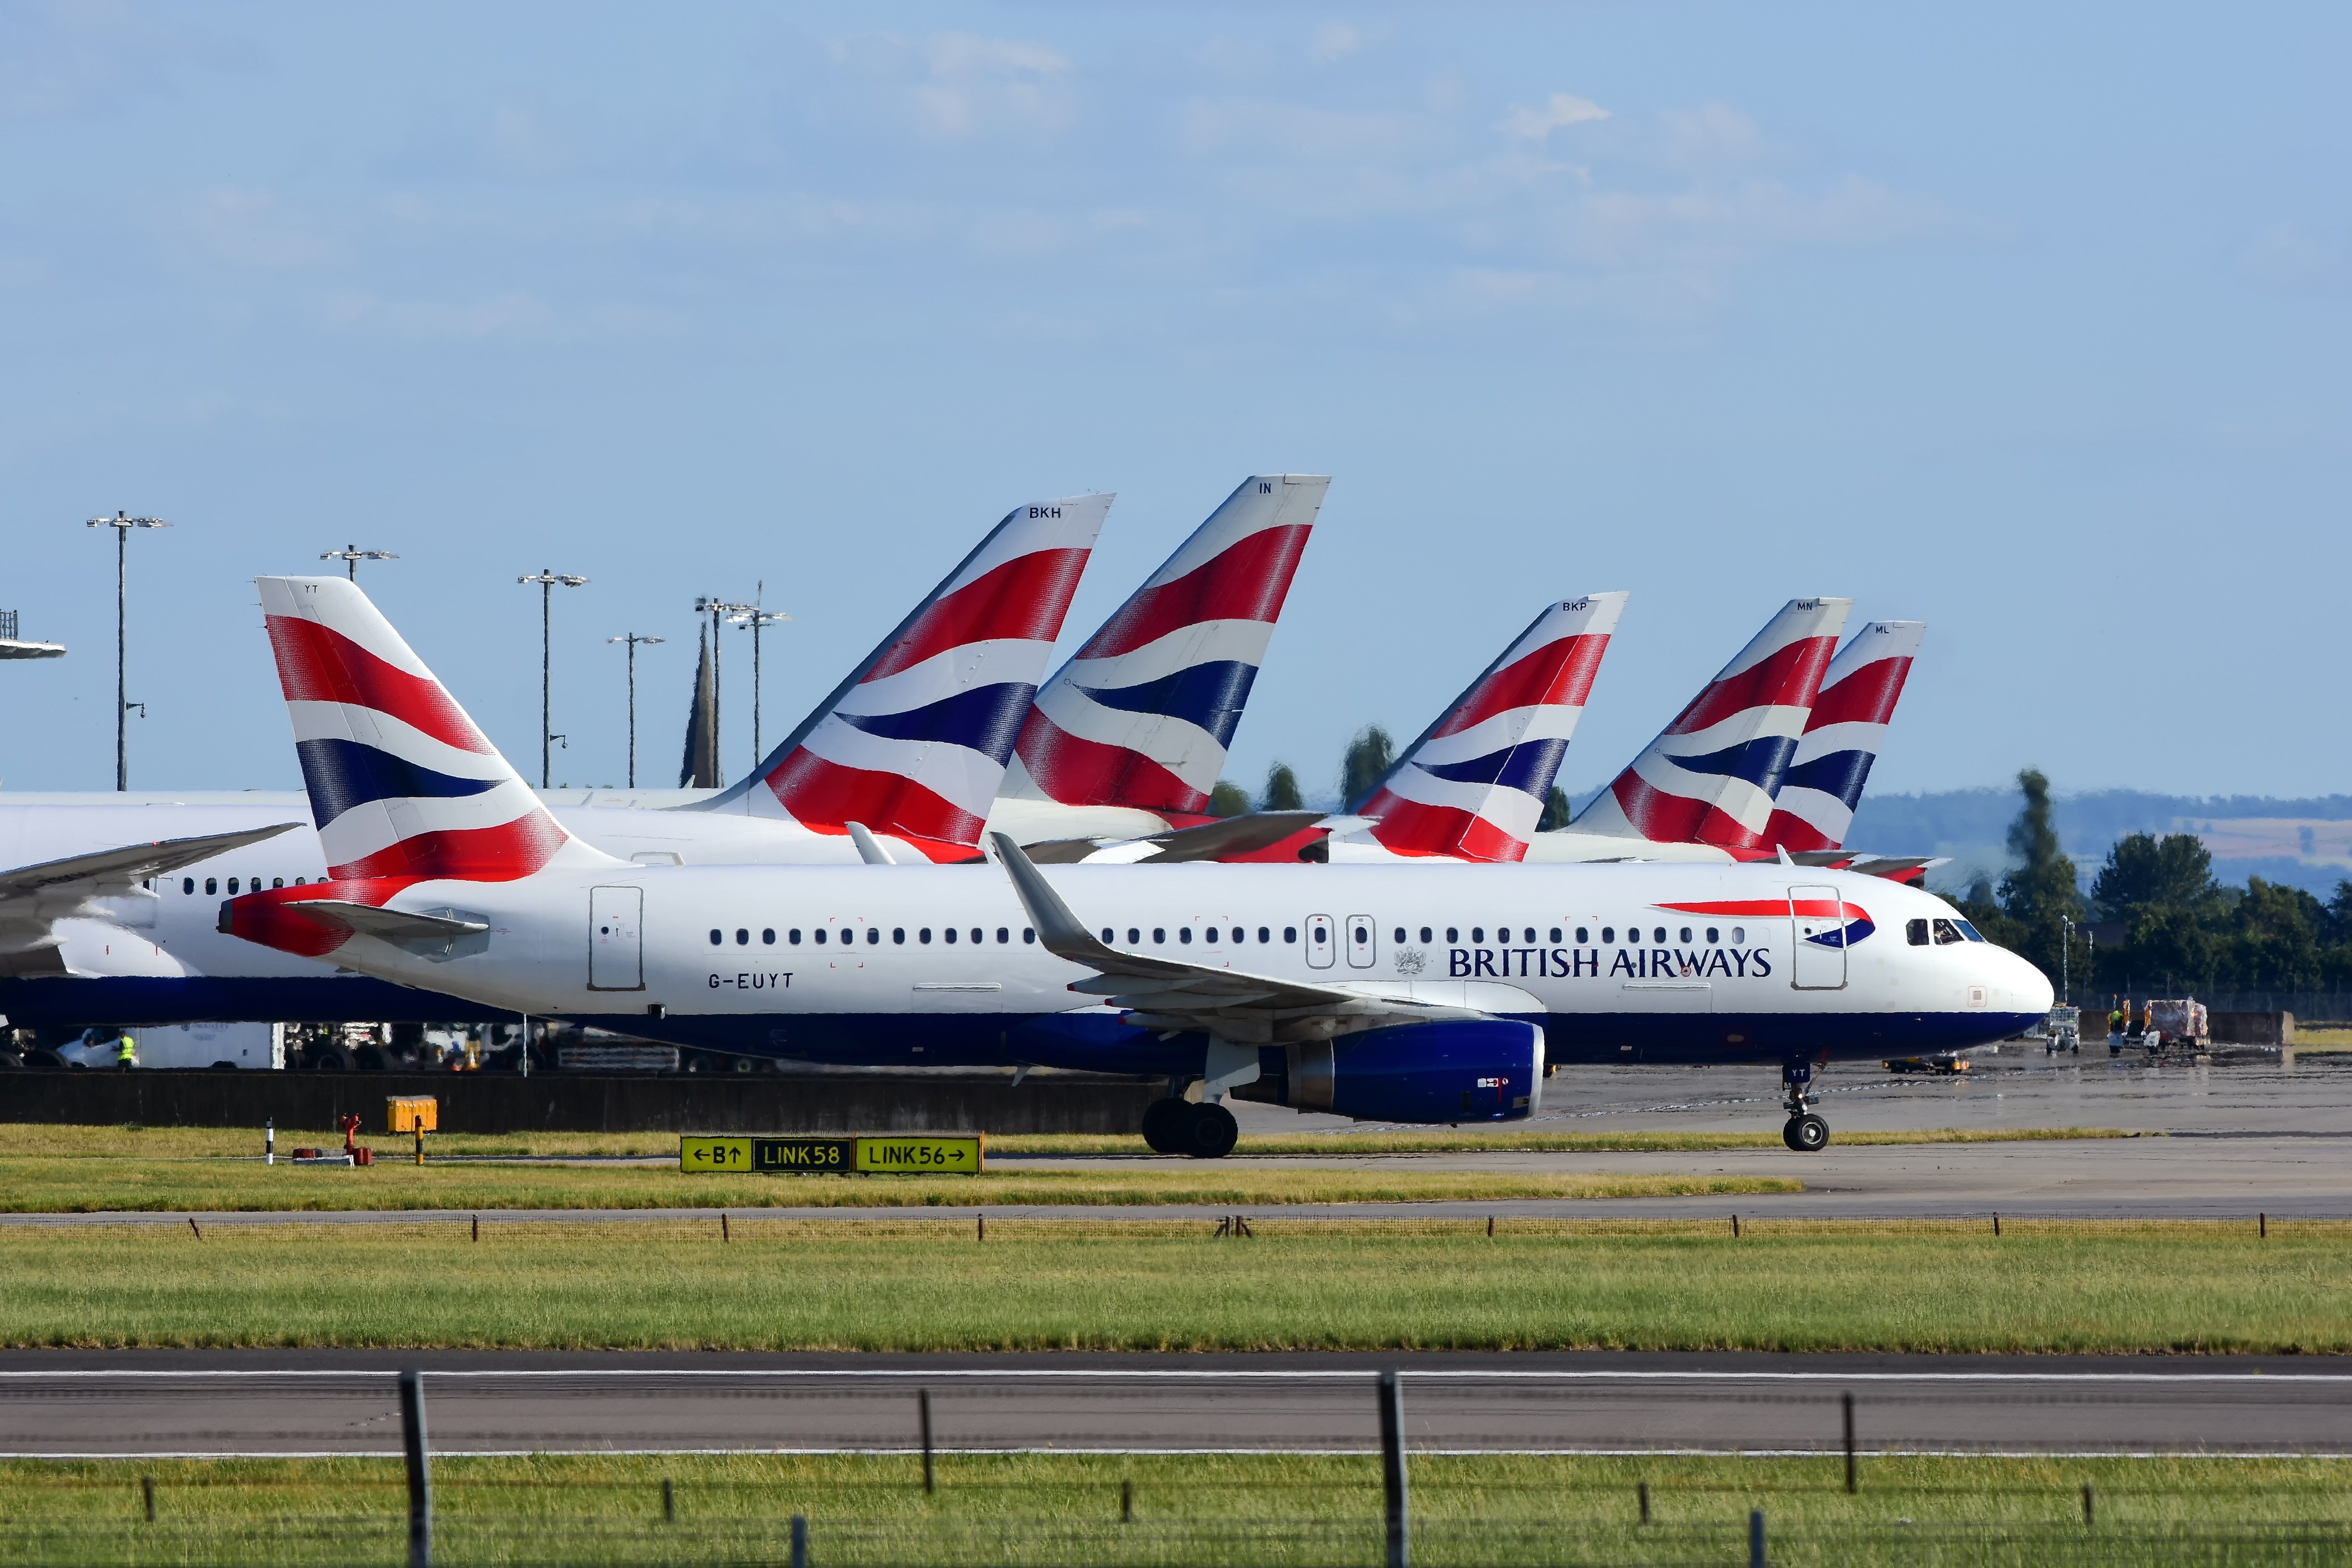 British Airways Airbus A320 Taxiing At London Heathrow Airport